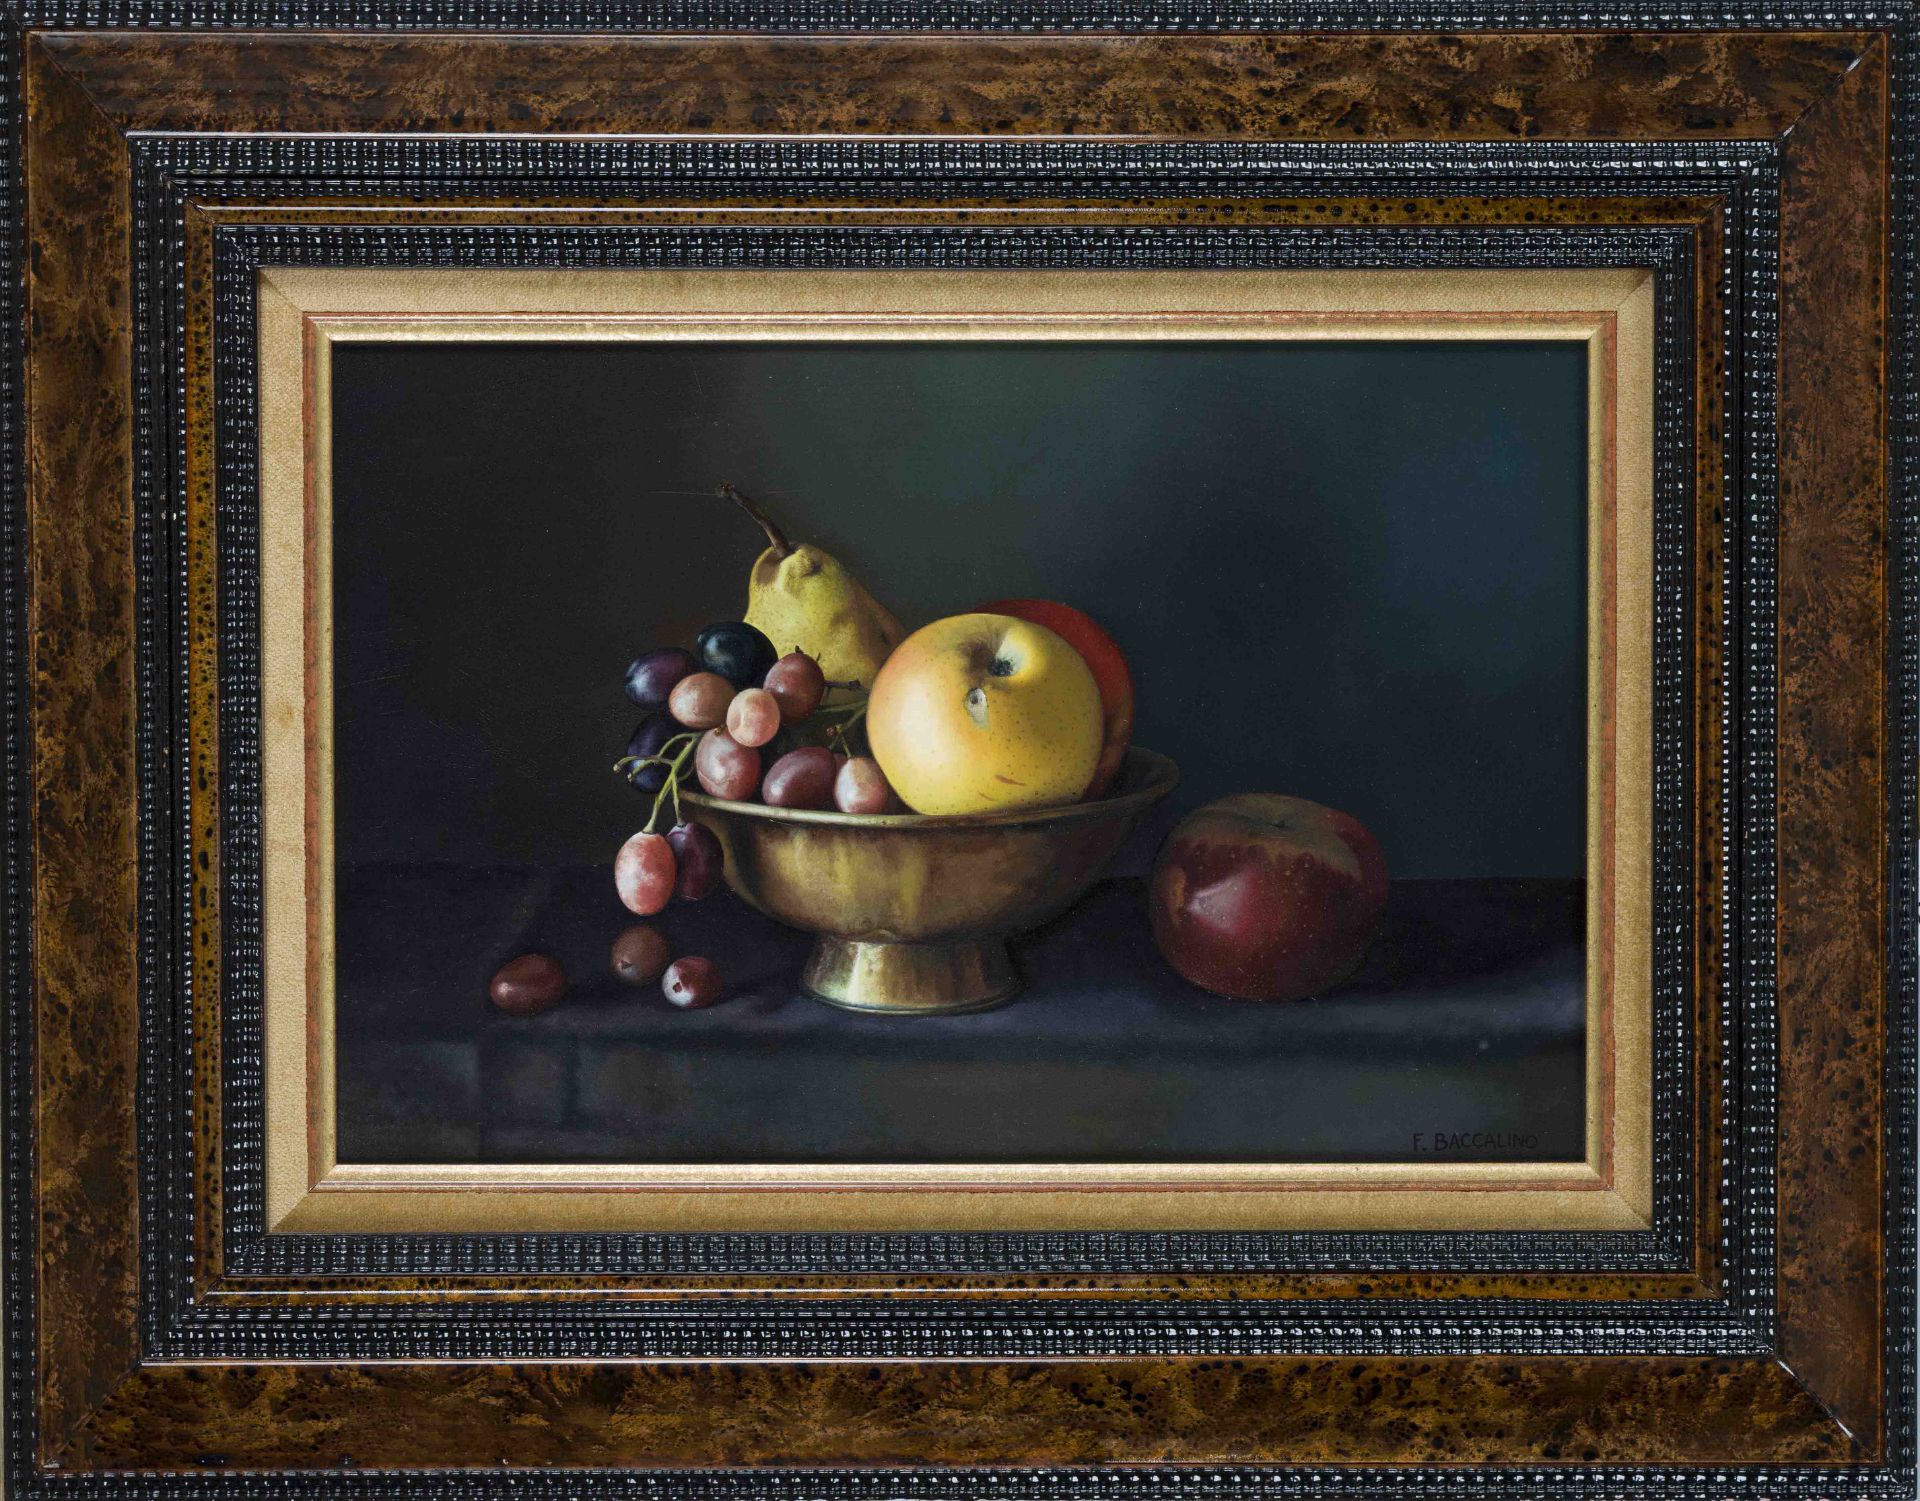 Frédéric Baccalino (*1962), Italian painter of naturalistic still lifes, here a still life with a